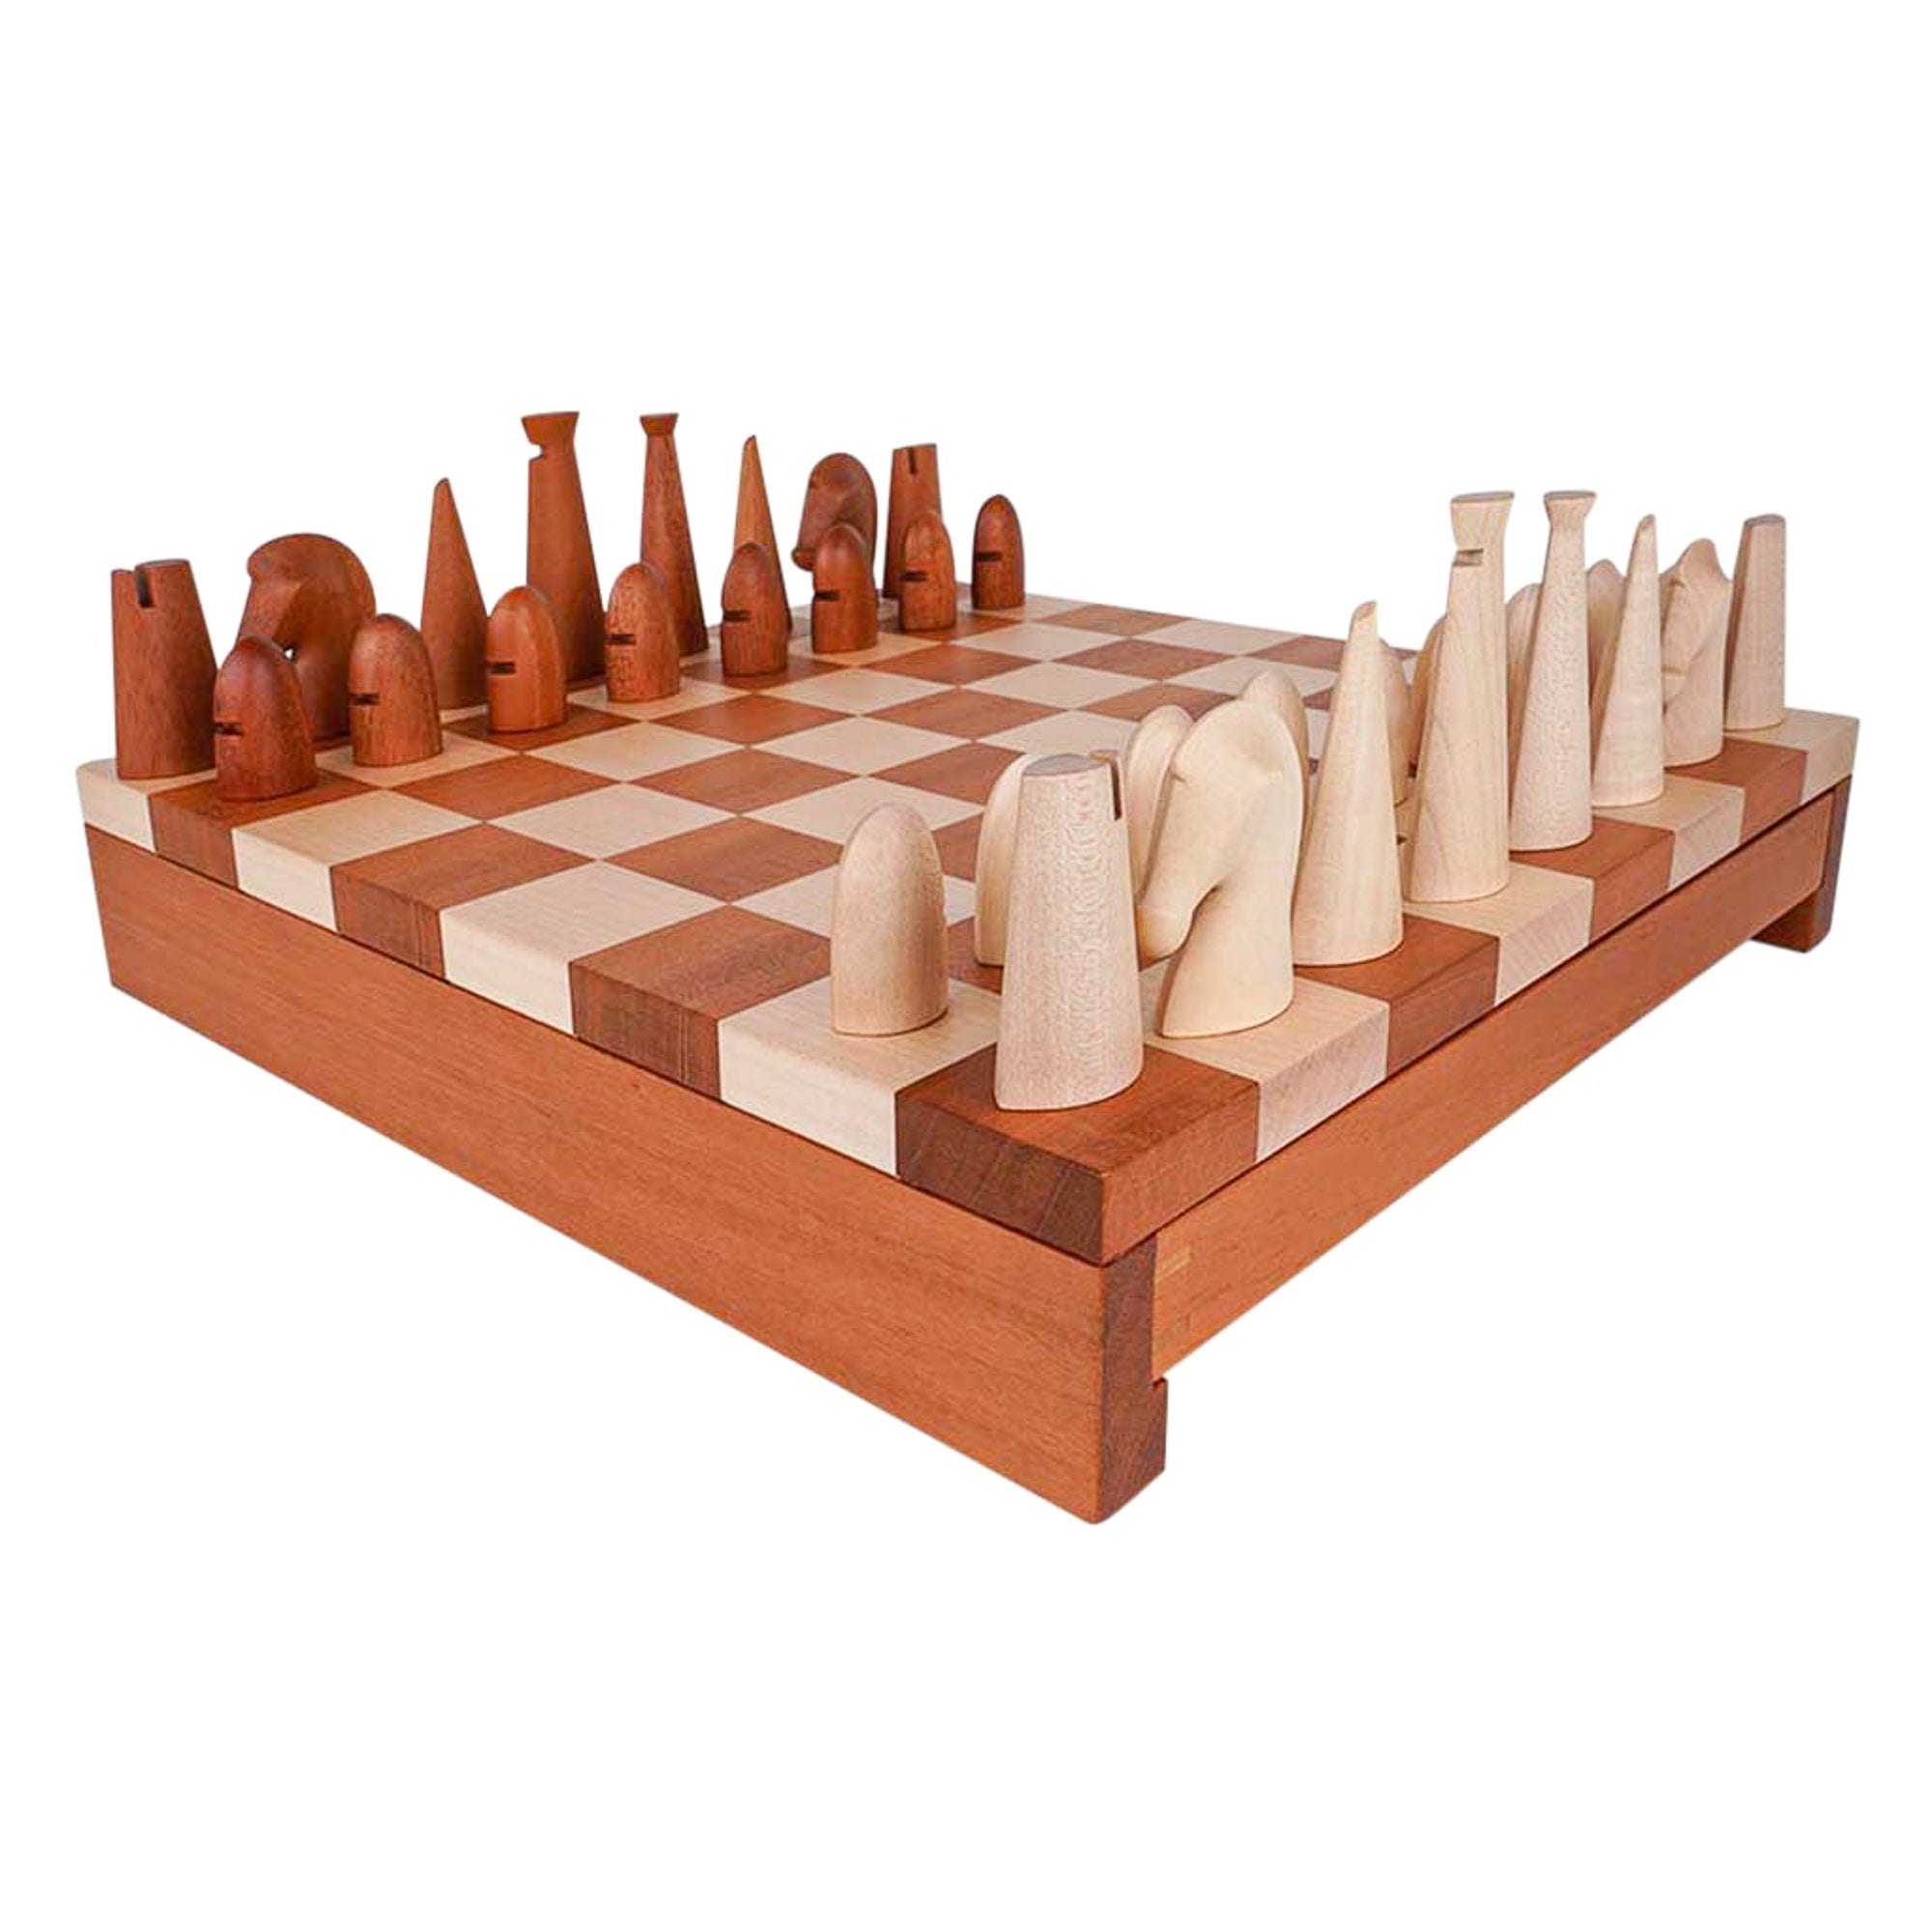 HERMES CHESS SET  Knight chess, Chess pieces, Chess board